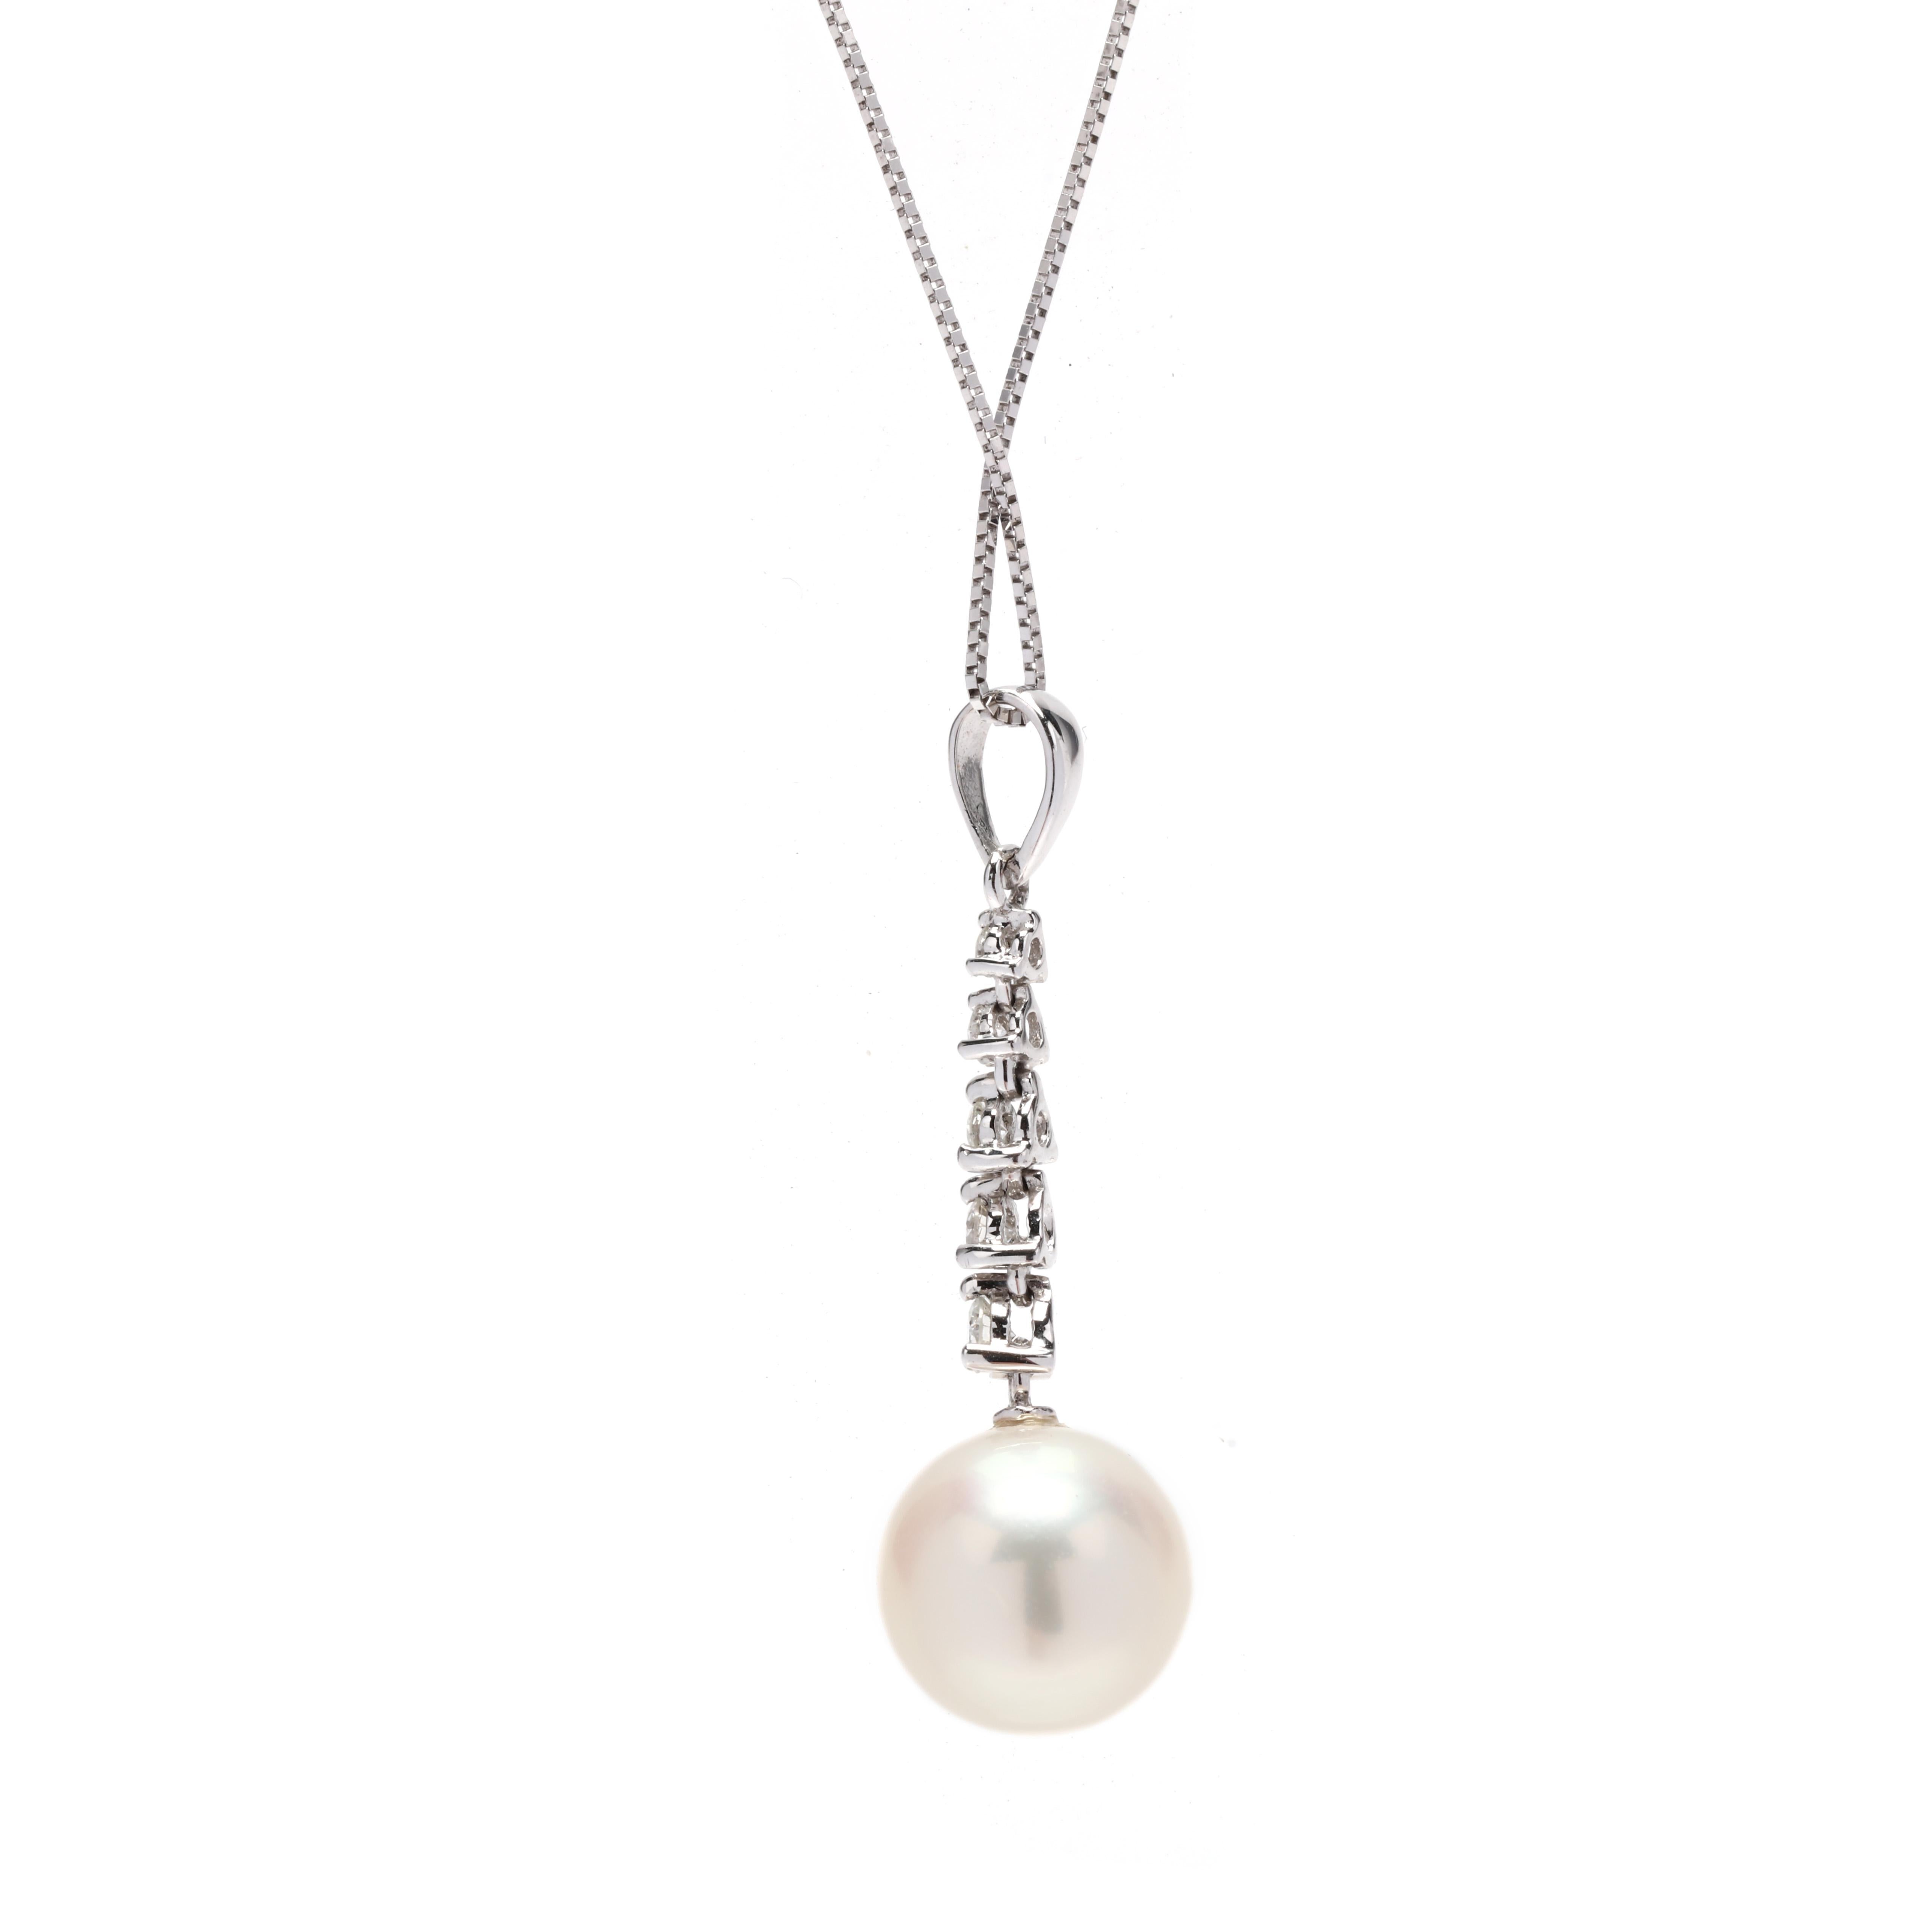 A 14 karat white gold pearl and diamond pendant necklace. This everyday pearl necklace features a tapered design of prong set, round brilliant cut diamonds weighing approximately .14 total carats with a 9.5 mm white pearl below, and all suspended